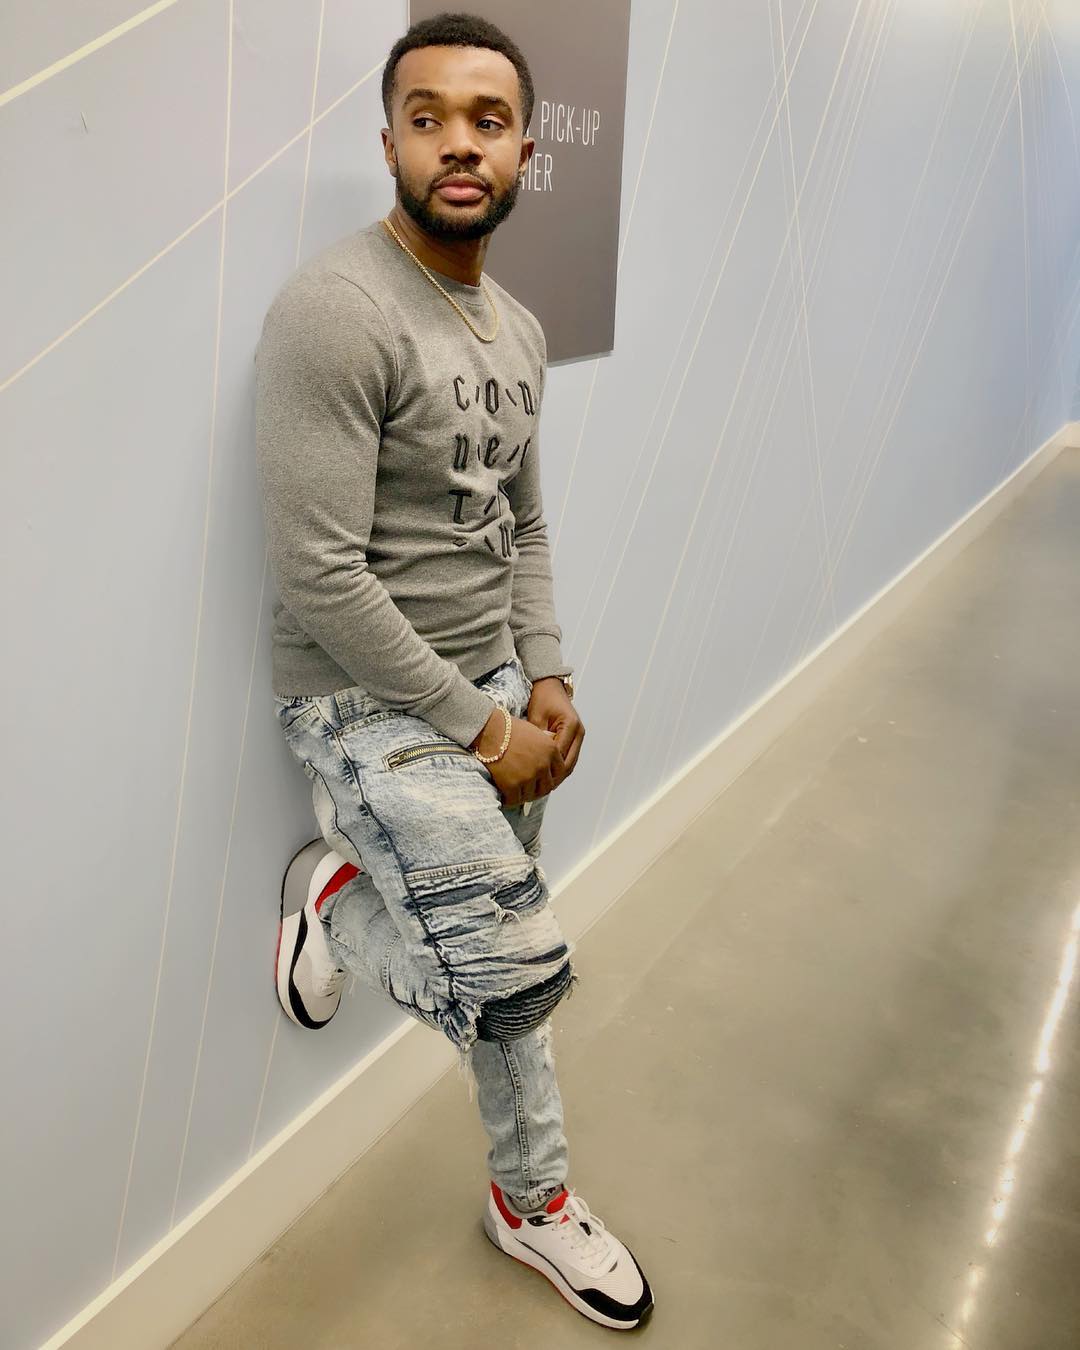 [E!News] Williams Uchemba Looking Amazing In New Latest Pictures ...